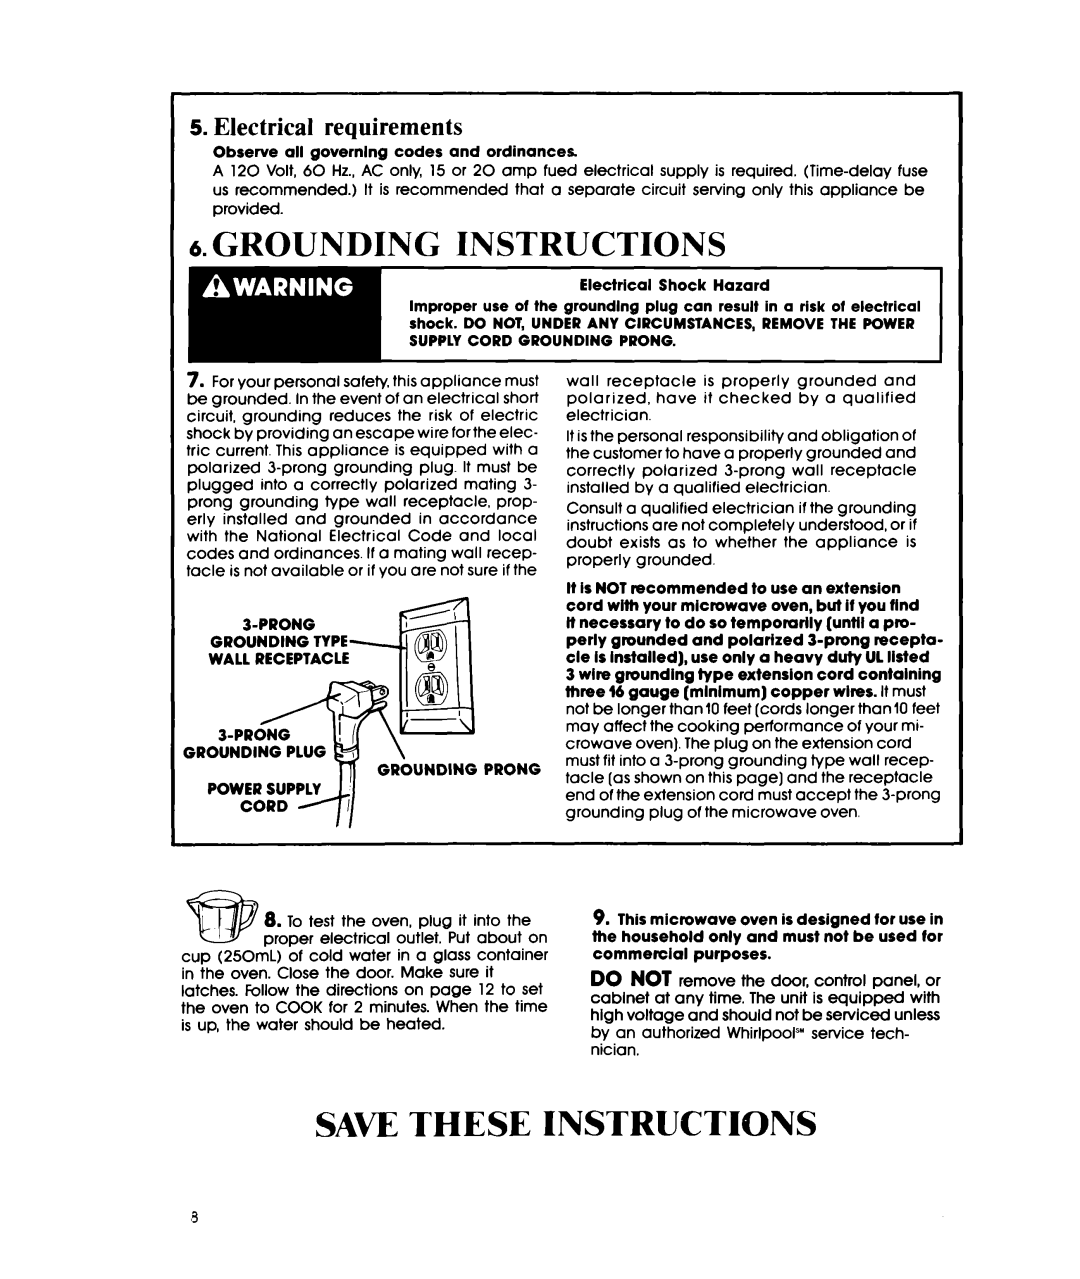 Whirlpool MWIOOOXW manual Grounding Instructions, Save These Instructiqns, Electrical requirements 